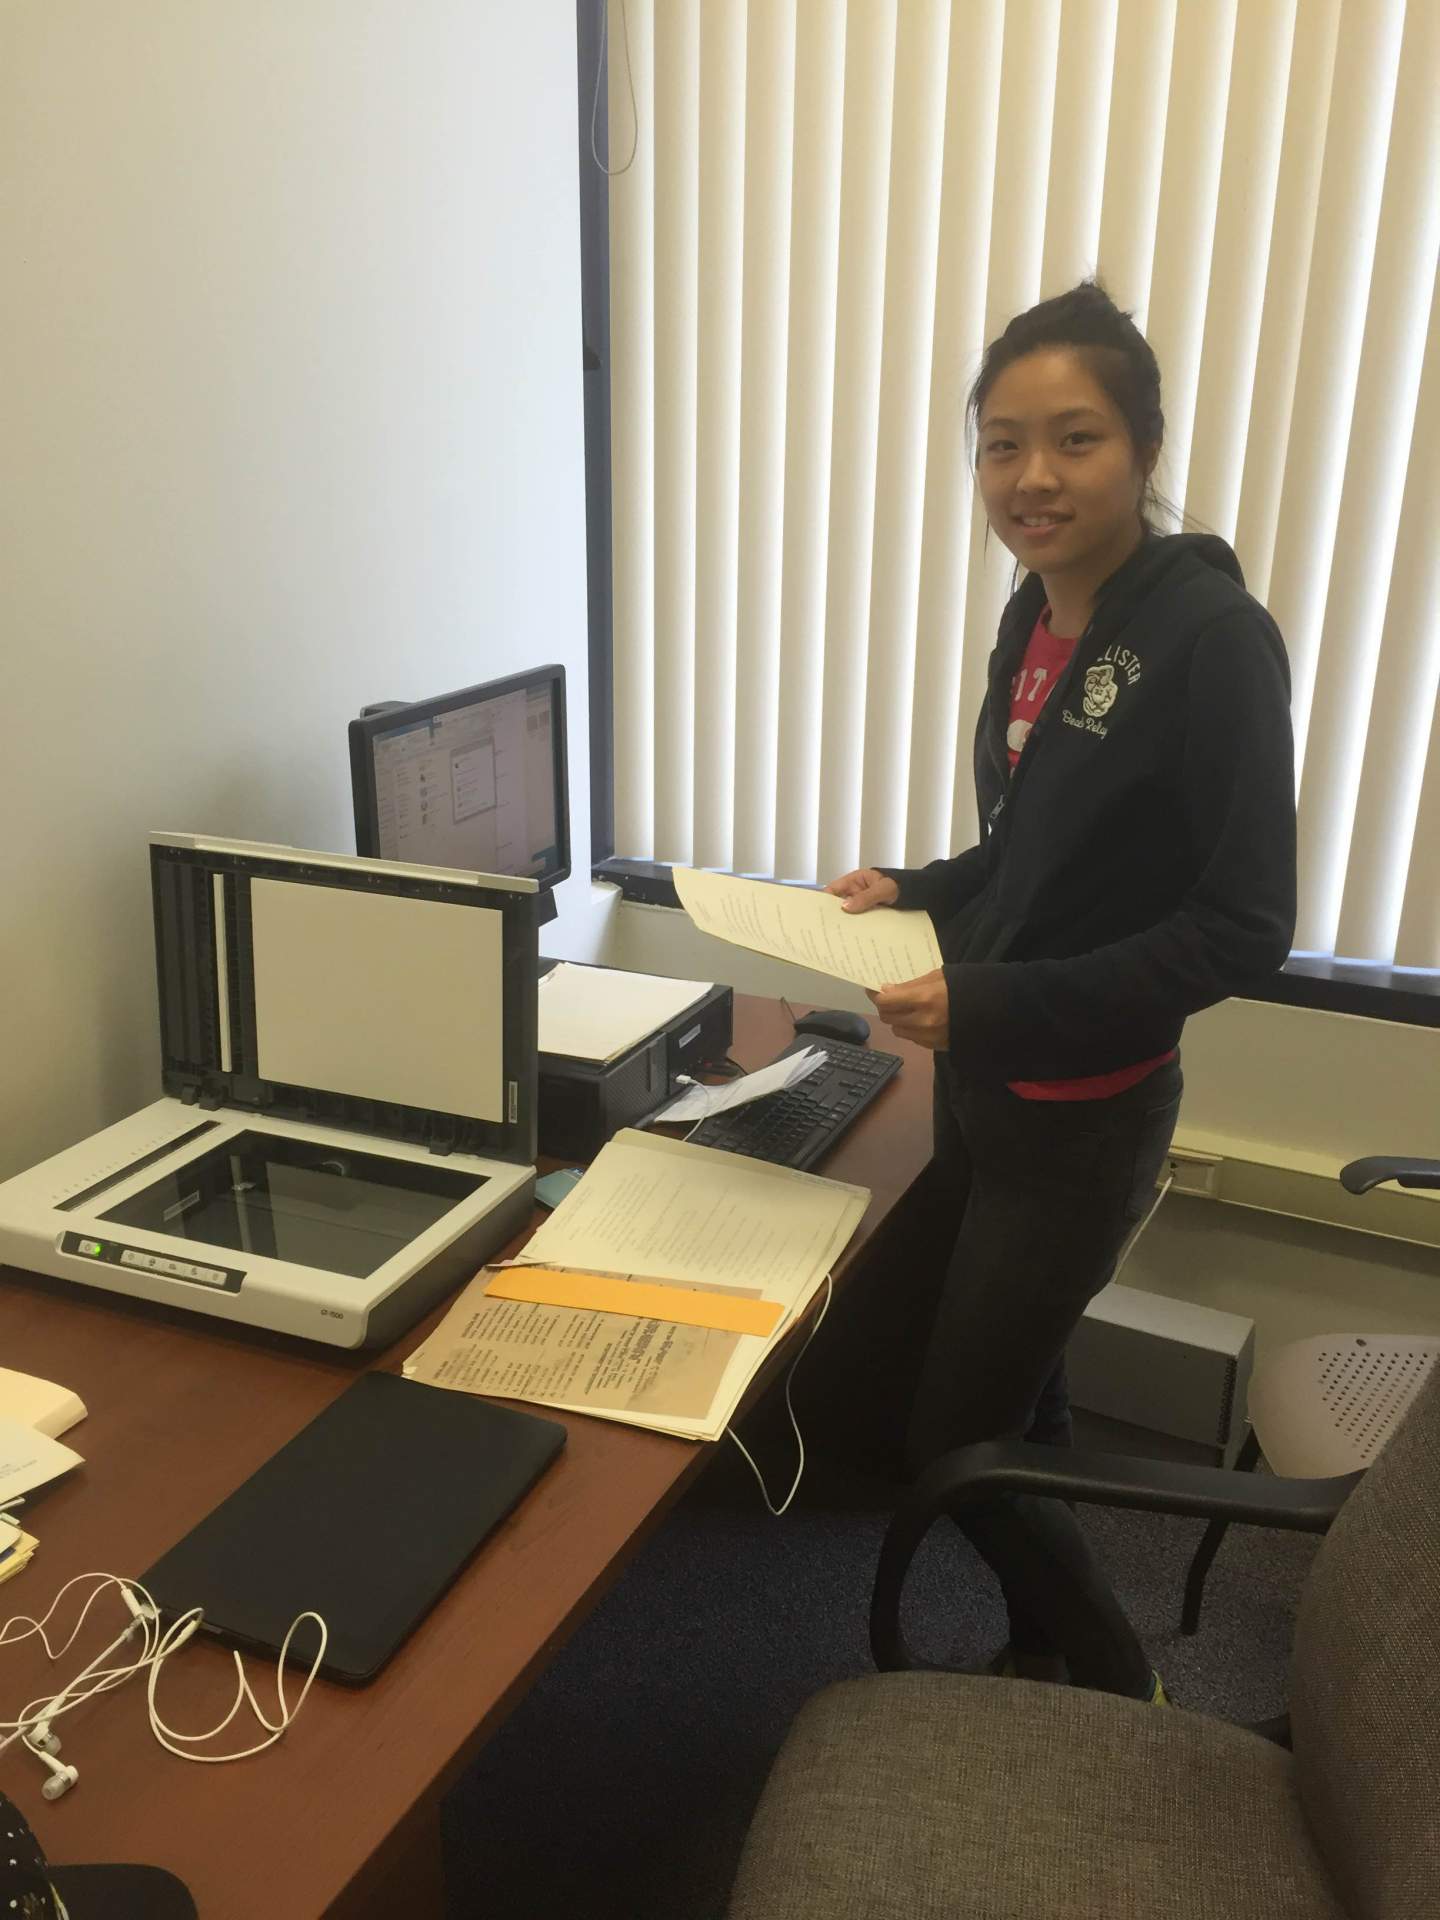 Archival Research as an Archives Intern: Cindy Huang's Experience